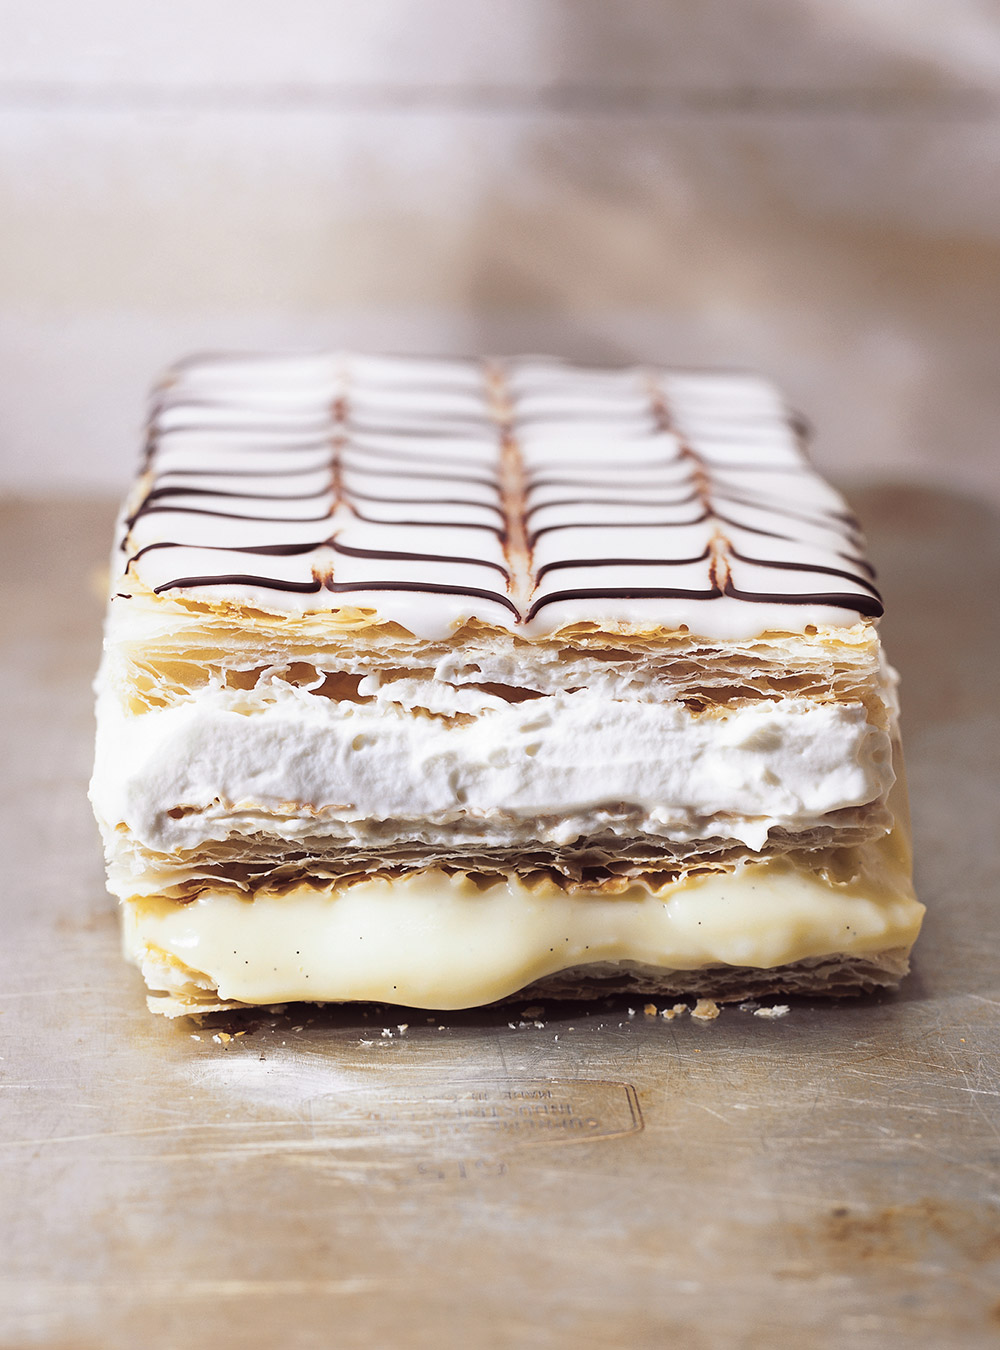 Best Mille Feuille Recipe - How to Make Mille Feuille